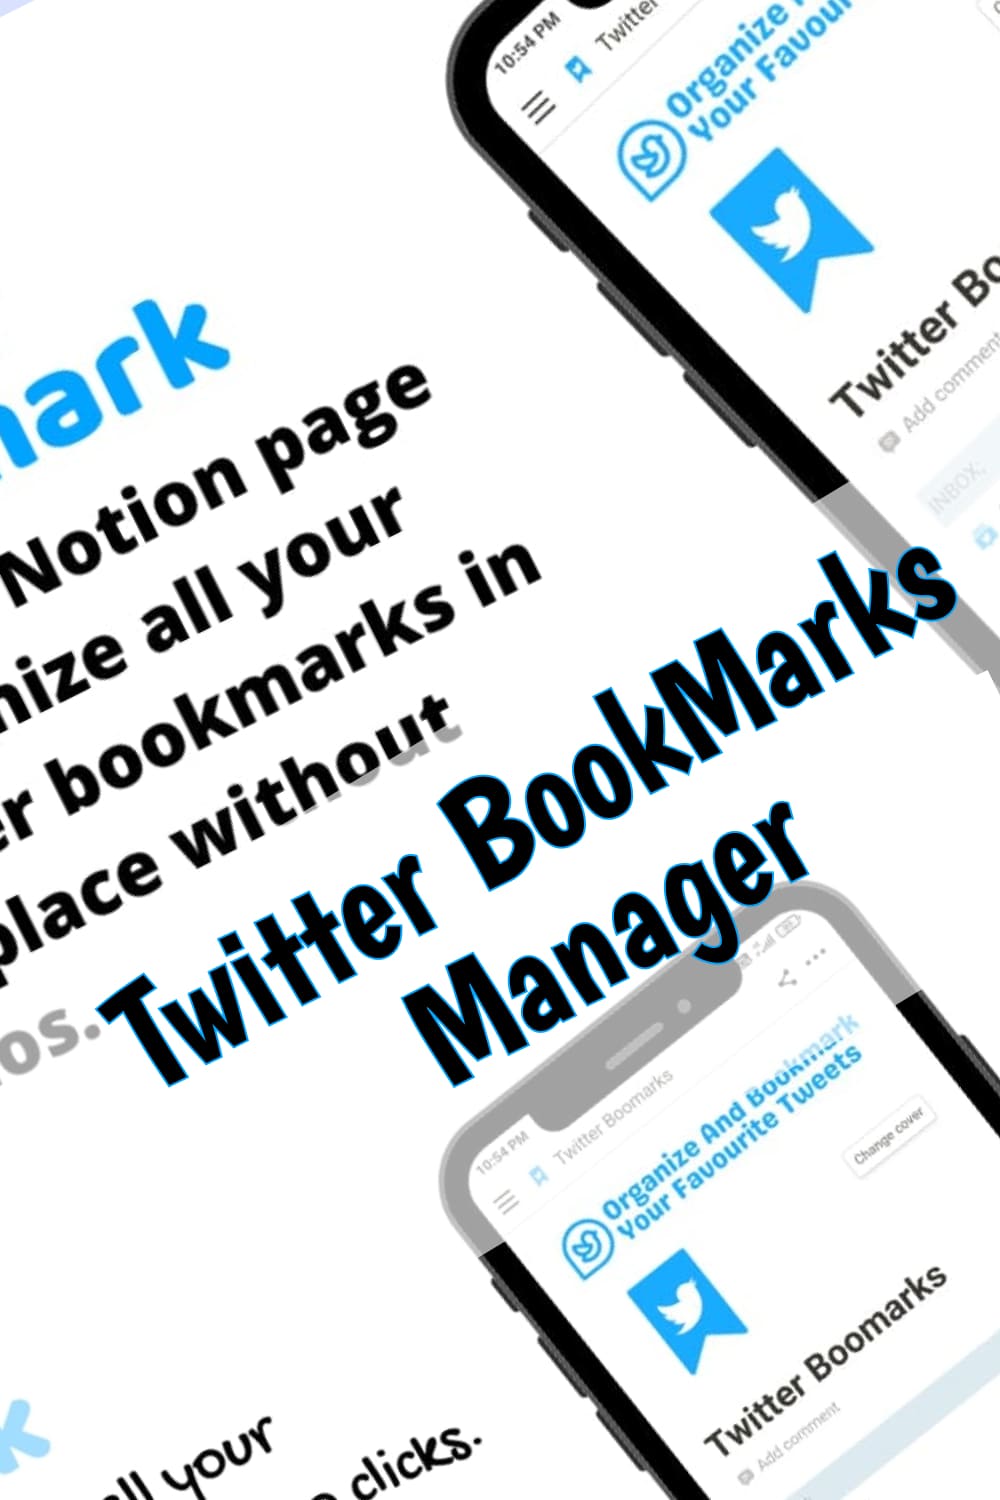 Twitter BookMarks Manager.